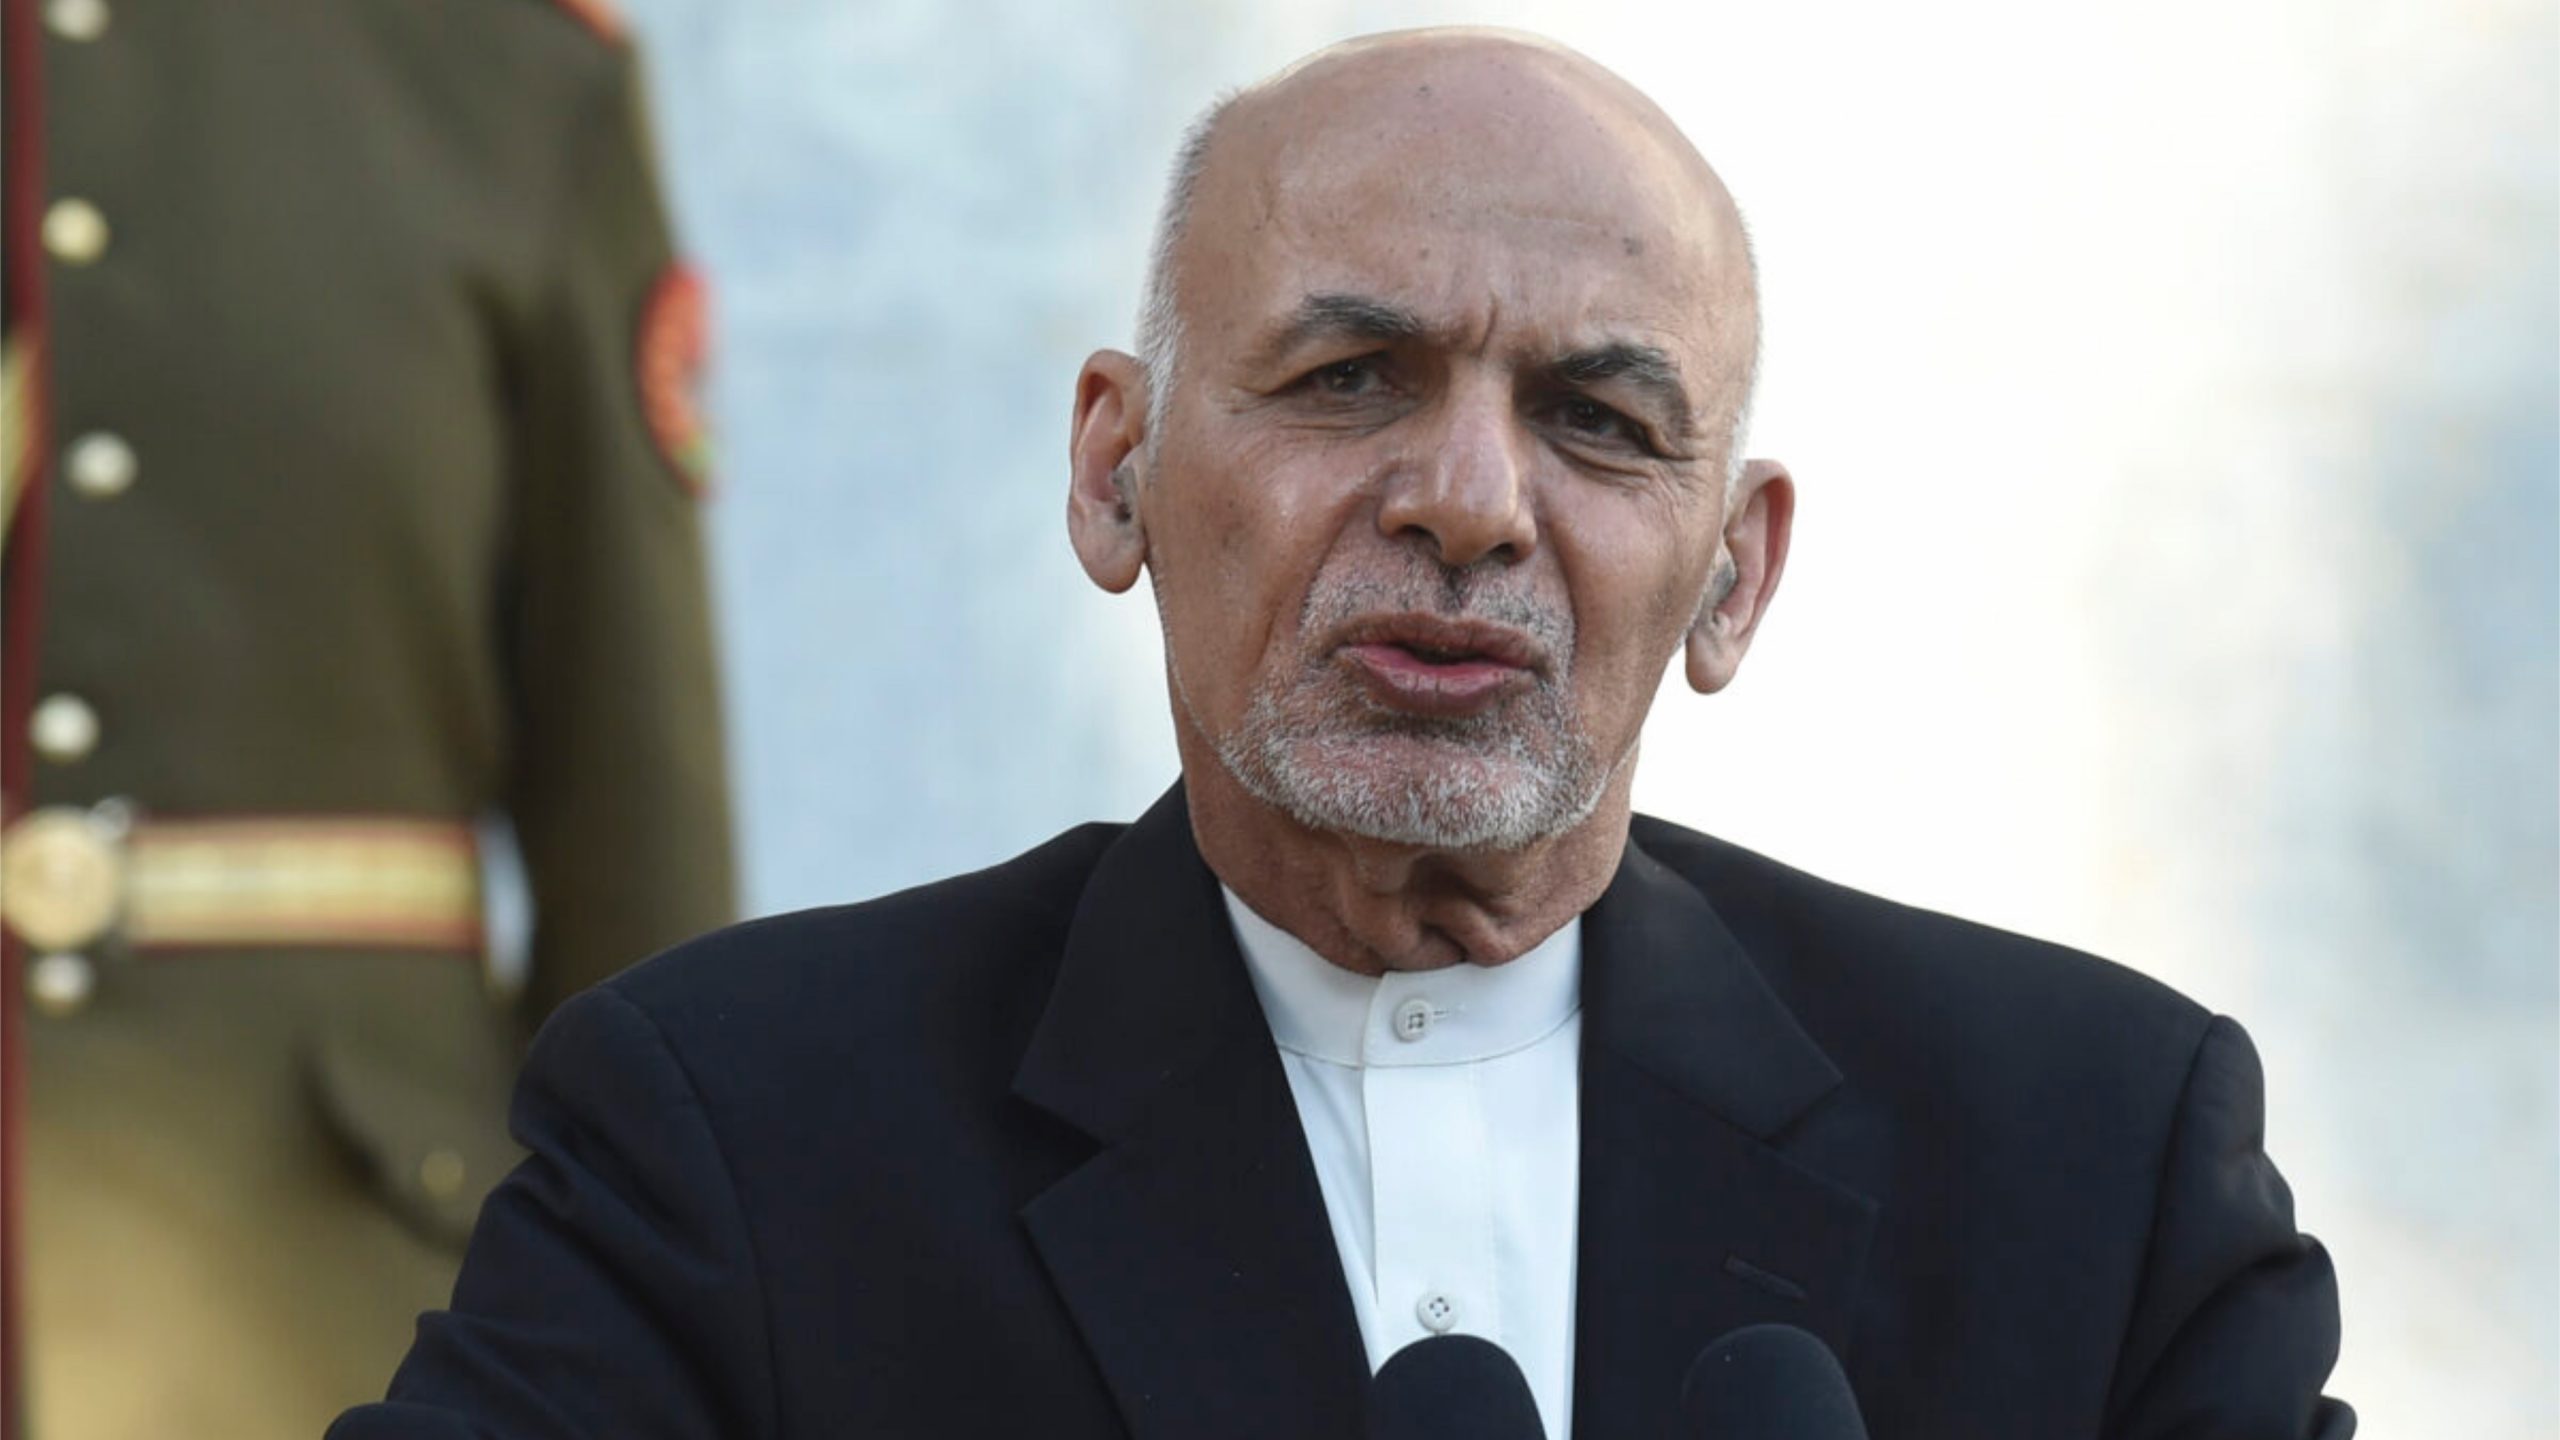 Afghan President Flees - UK Calls For NATO And UN To Convene - Harbingers Daily